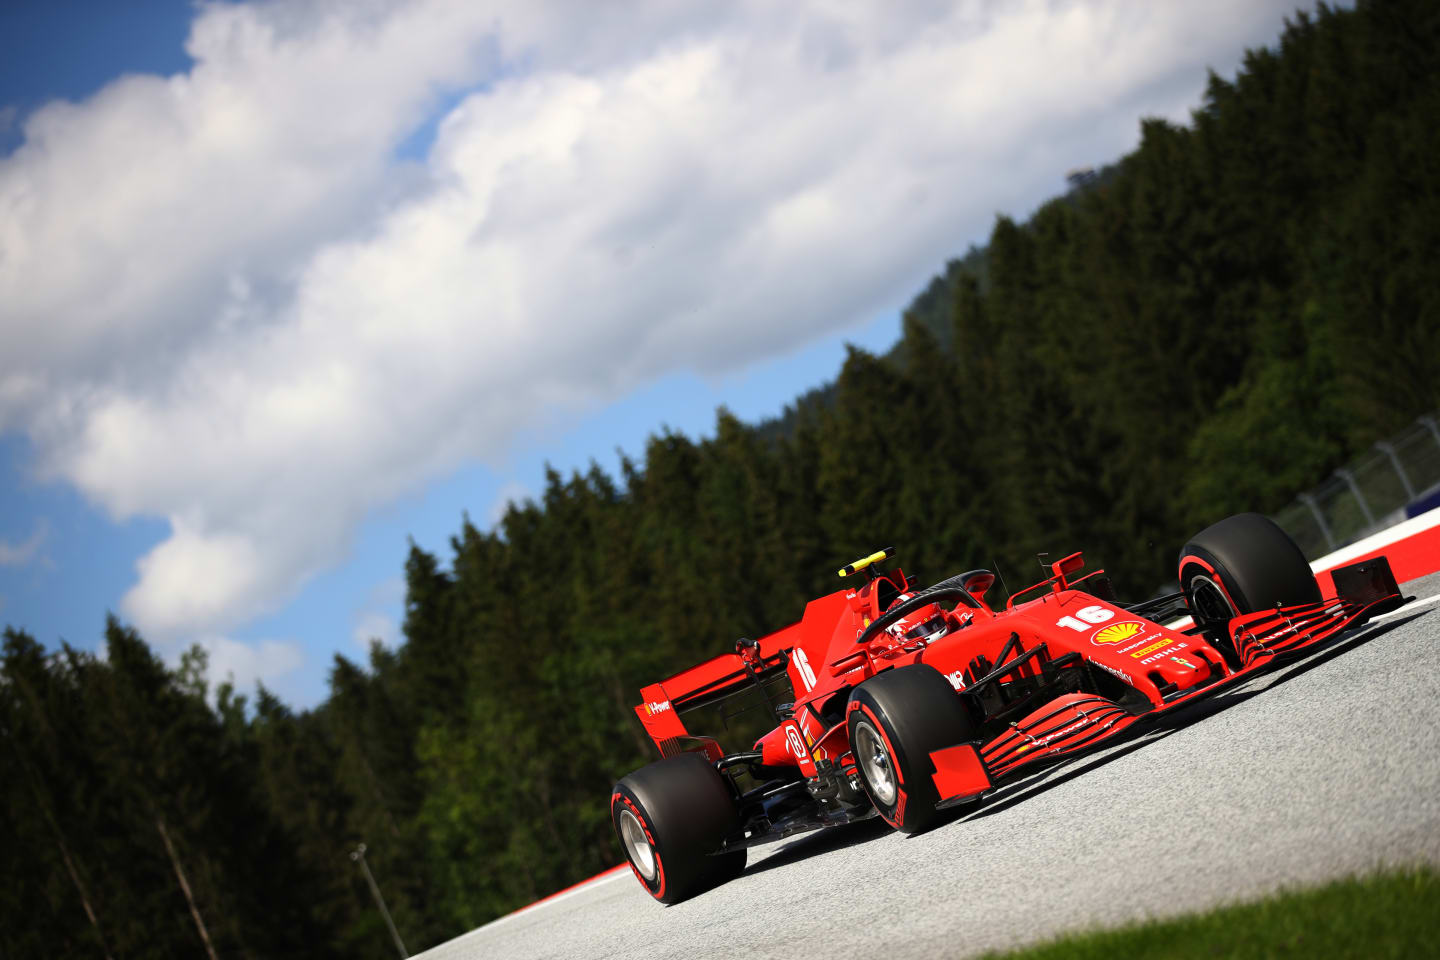 SPIELBERG, AUSTRIA - JULY 04: Charles Leclerc of Monaco driving the (16) Scuderia Ferrari SF1000 on track during qualifying for the Formula One Grand Prix of Austria at Red Bull Ring on July 04, 2020 in Spielberg, Austria. (Photo by Bryn Lennon/Getty Images)